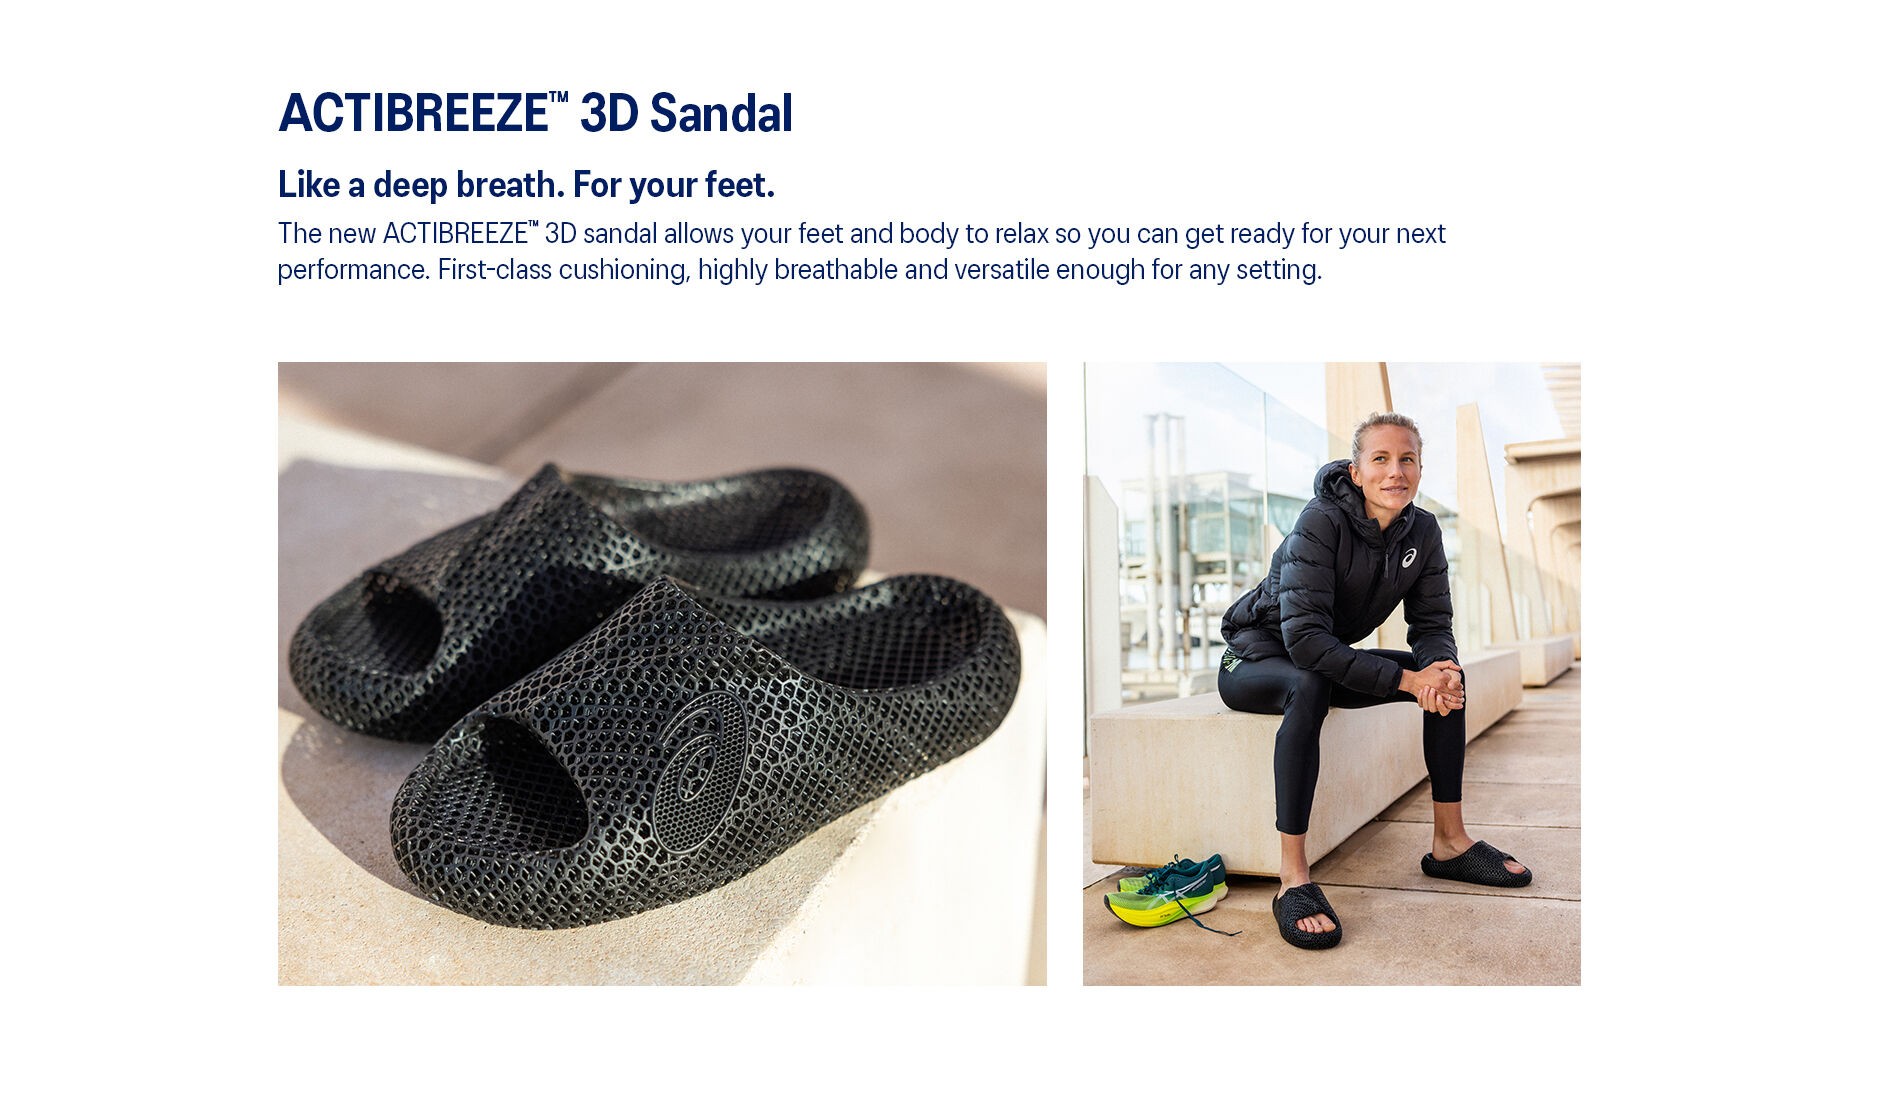 ASICS Makes 3D Printed Footwear Debut With New ACTIBREEZE 3D SANDAL 3D  Printing Industry 